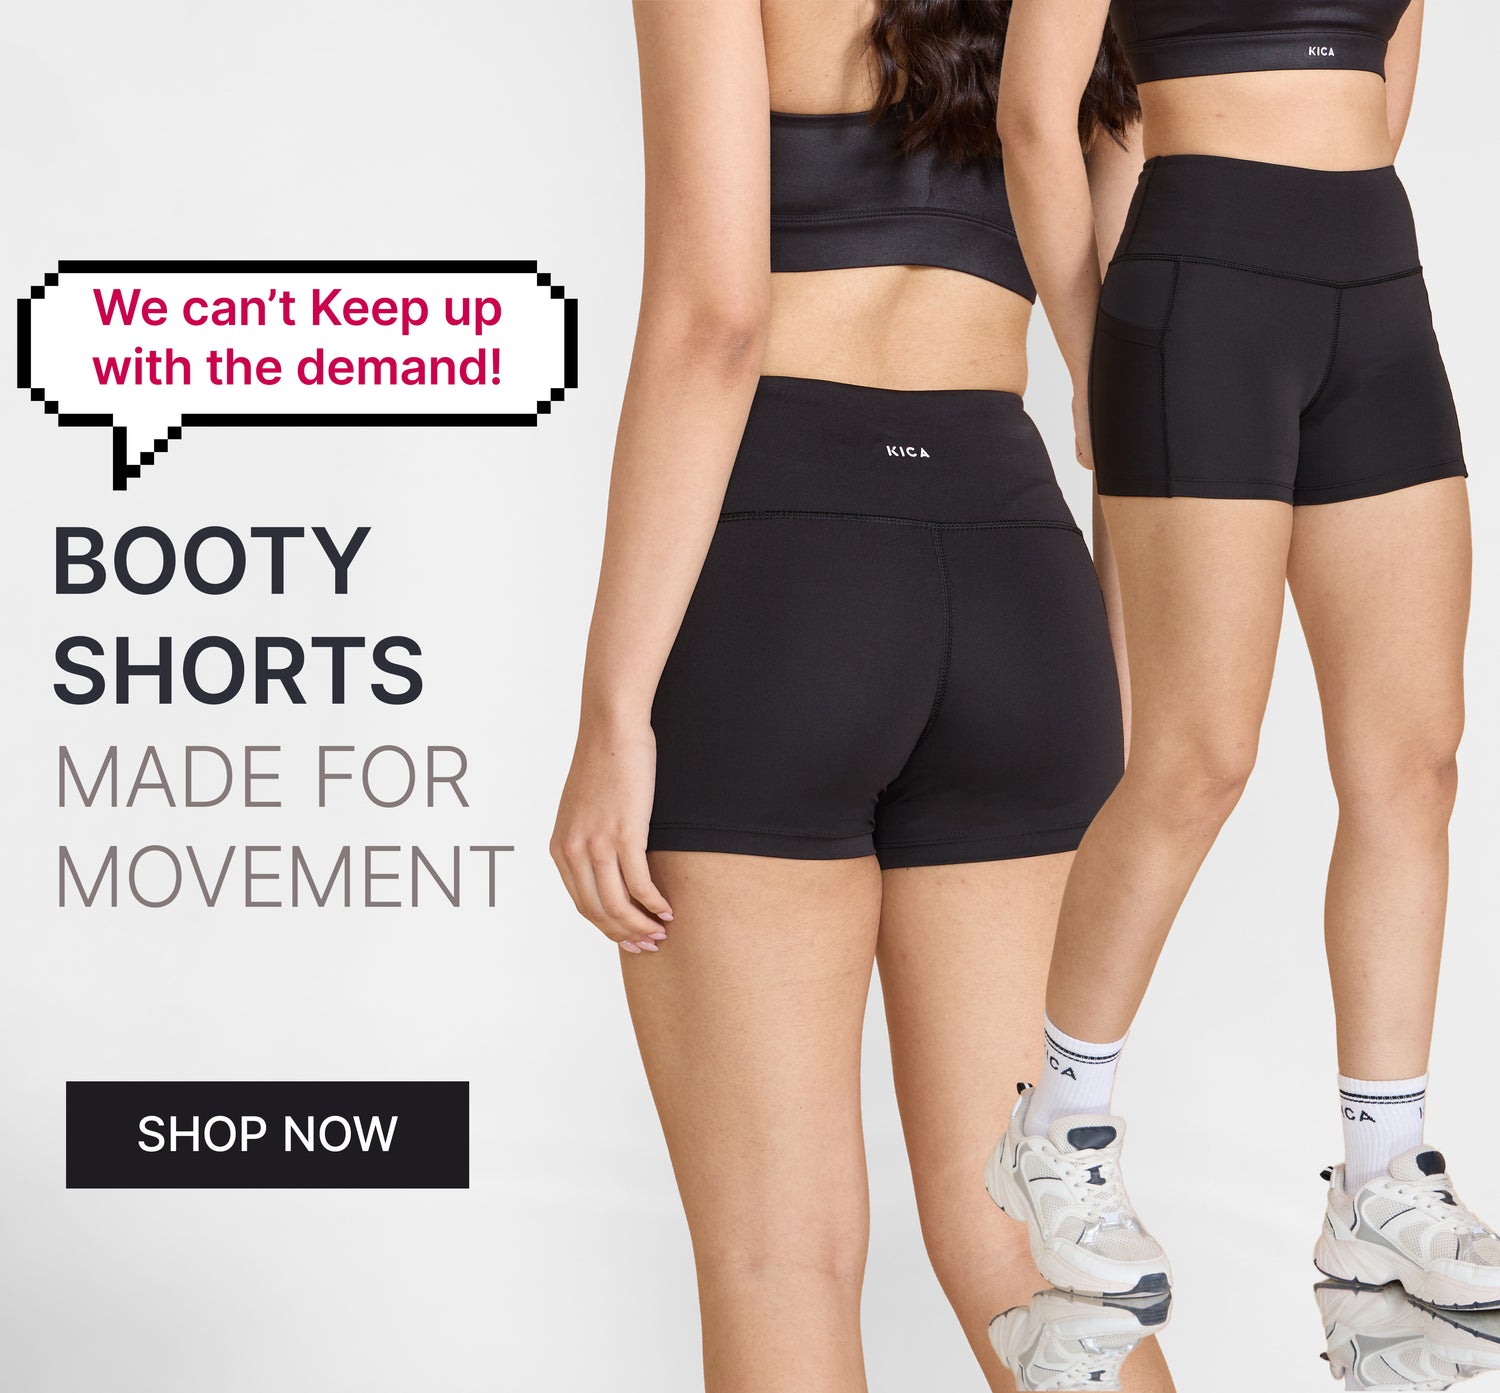 BODYACTIVE SPORTS WEAR LADIES LOWER ASSORTED PRINTBODYACTIVE SPORTS WEAR  LADIES LOWER ASSORTED PRINT LL15 in Kota-Rajasthan at best price by Arihant  Trading Company - Justdial